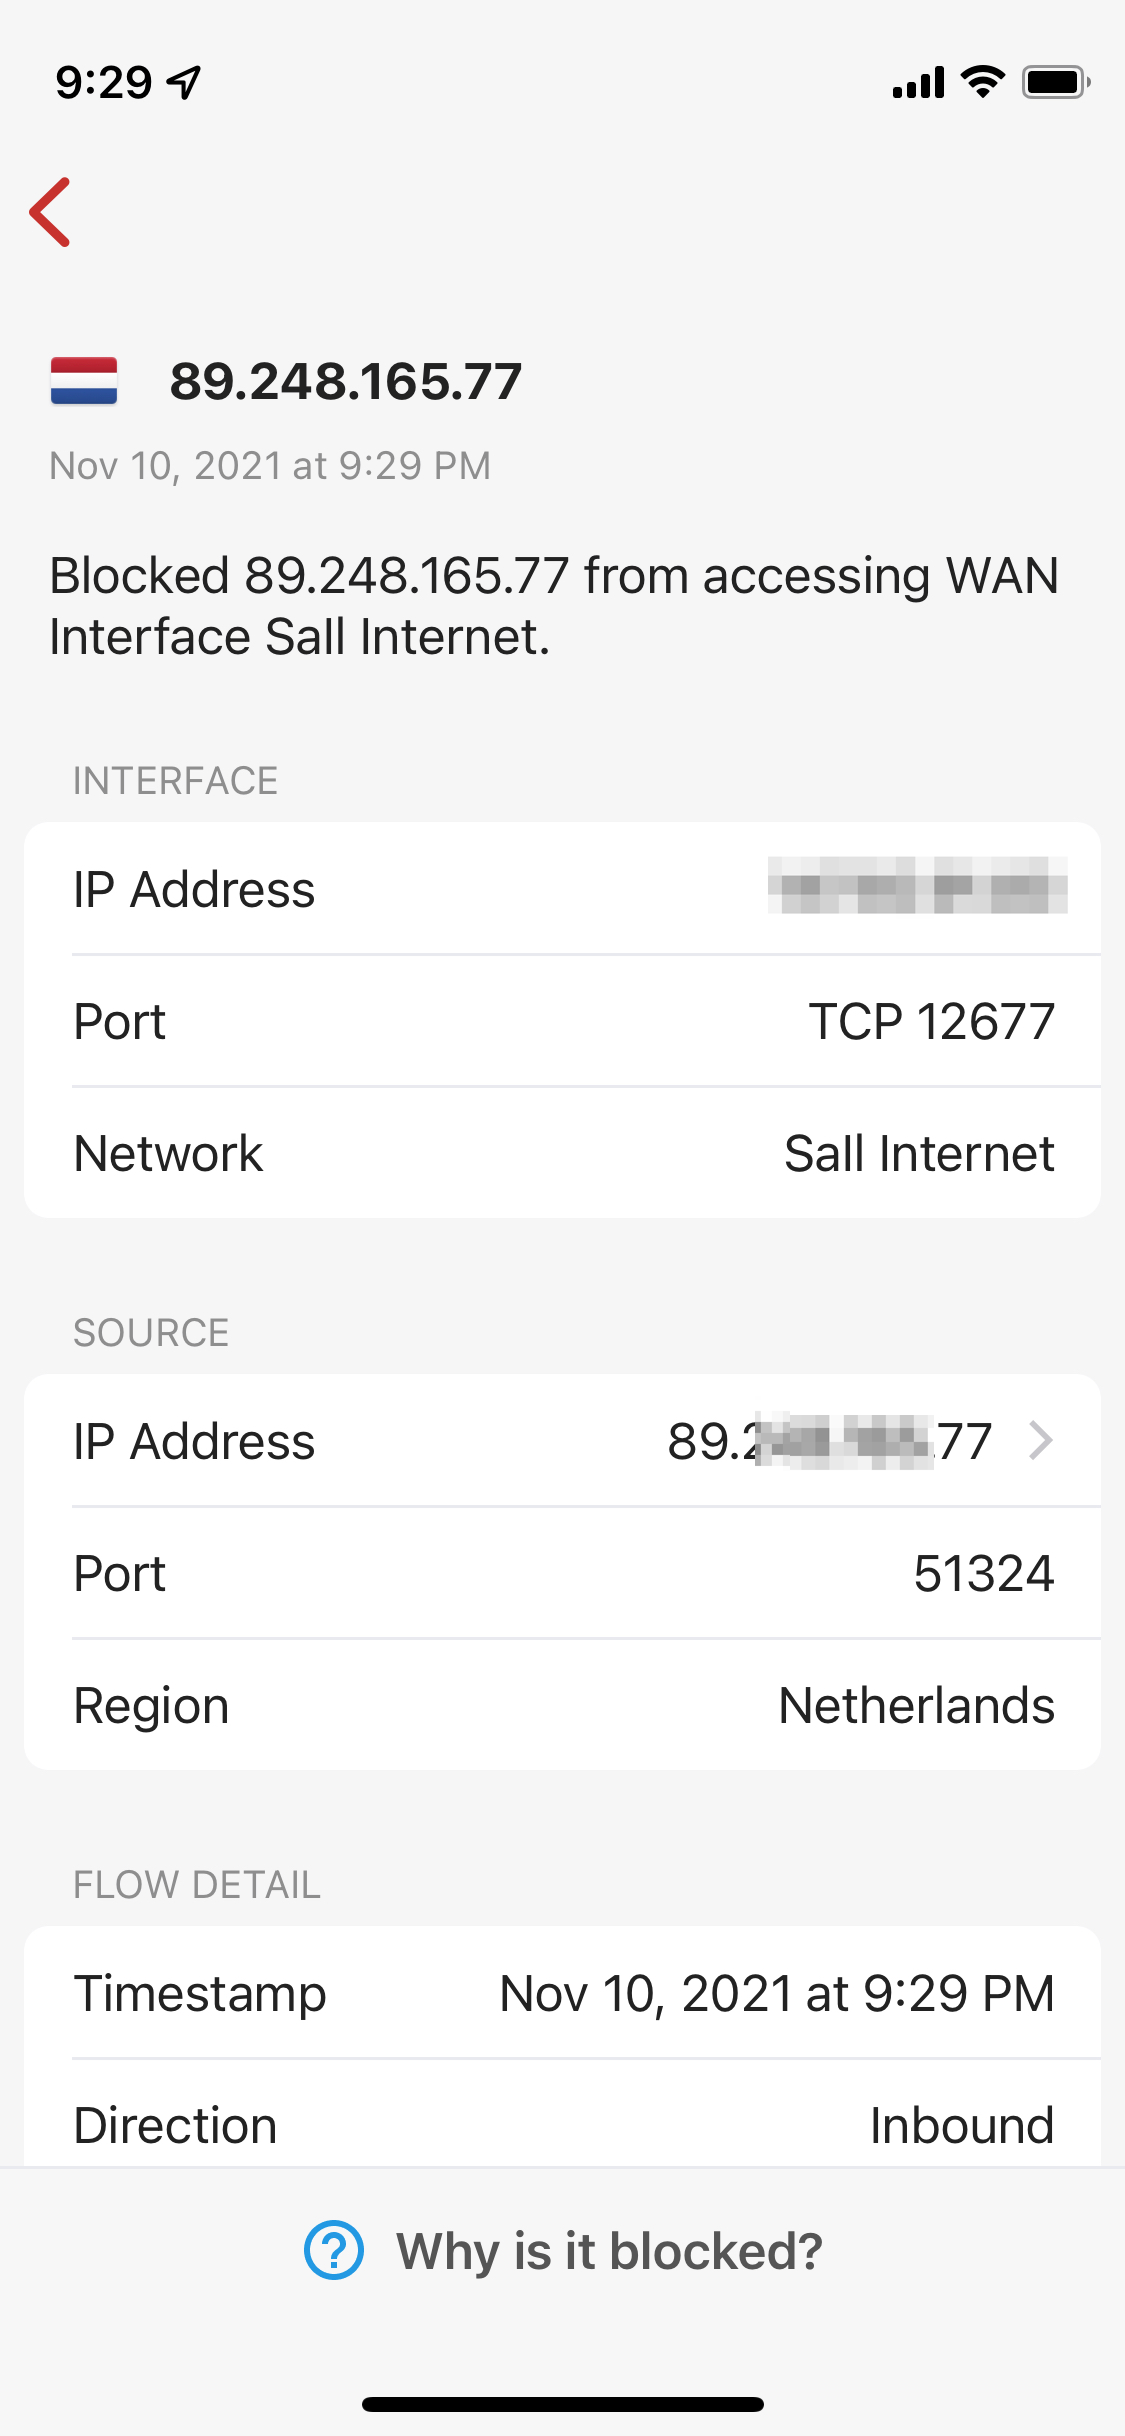 Secure your network by monitoring blocked entries and analyzing the location, destination, WAN connection, and more